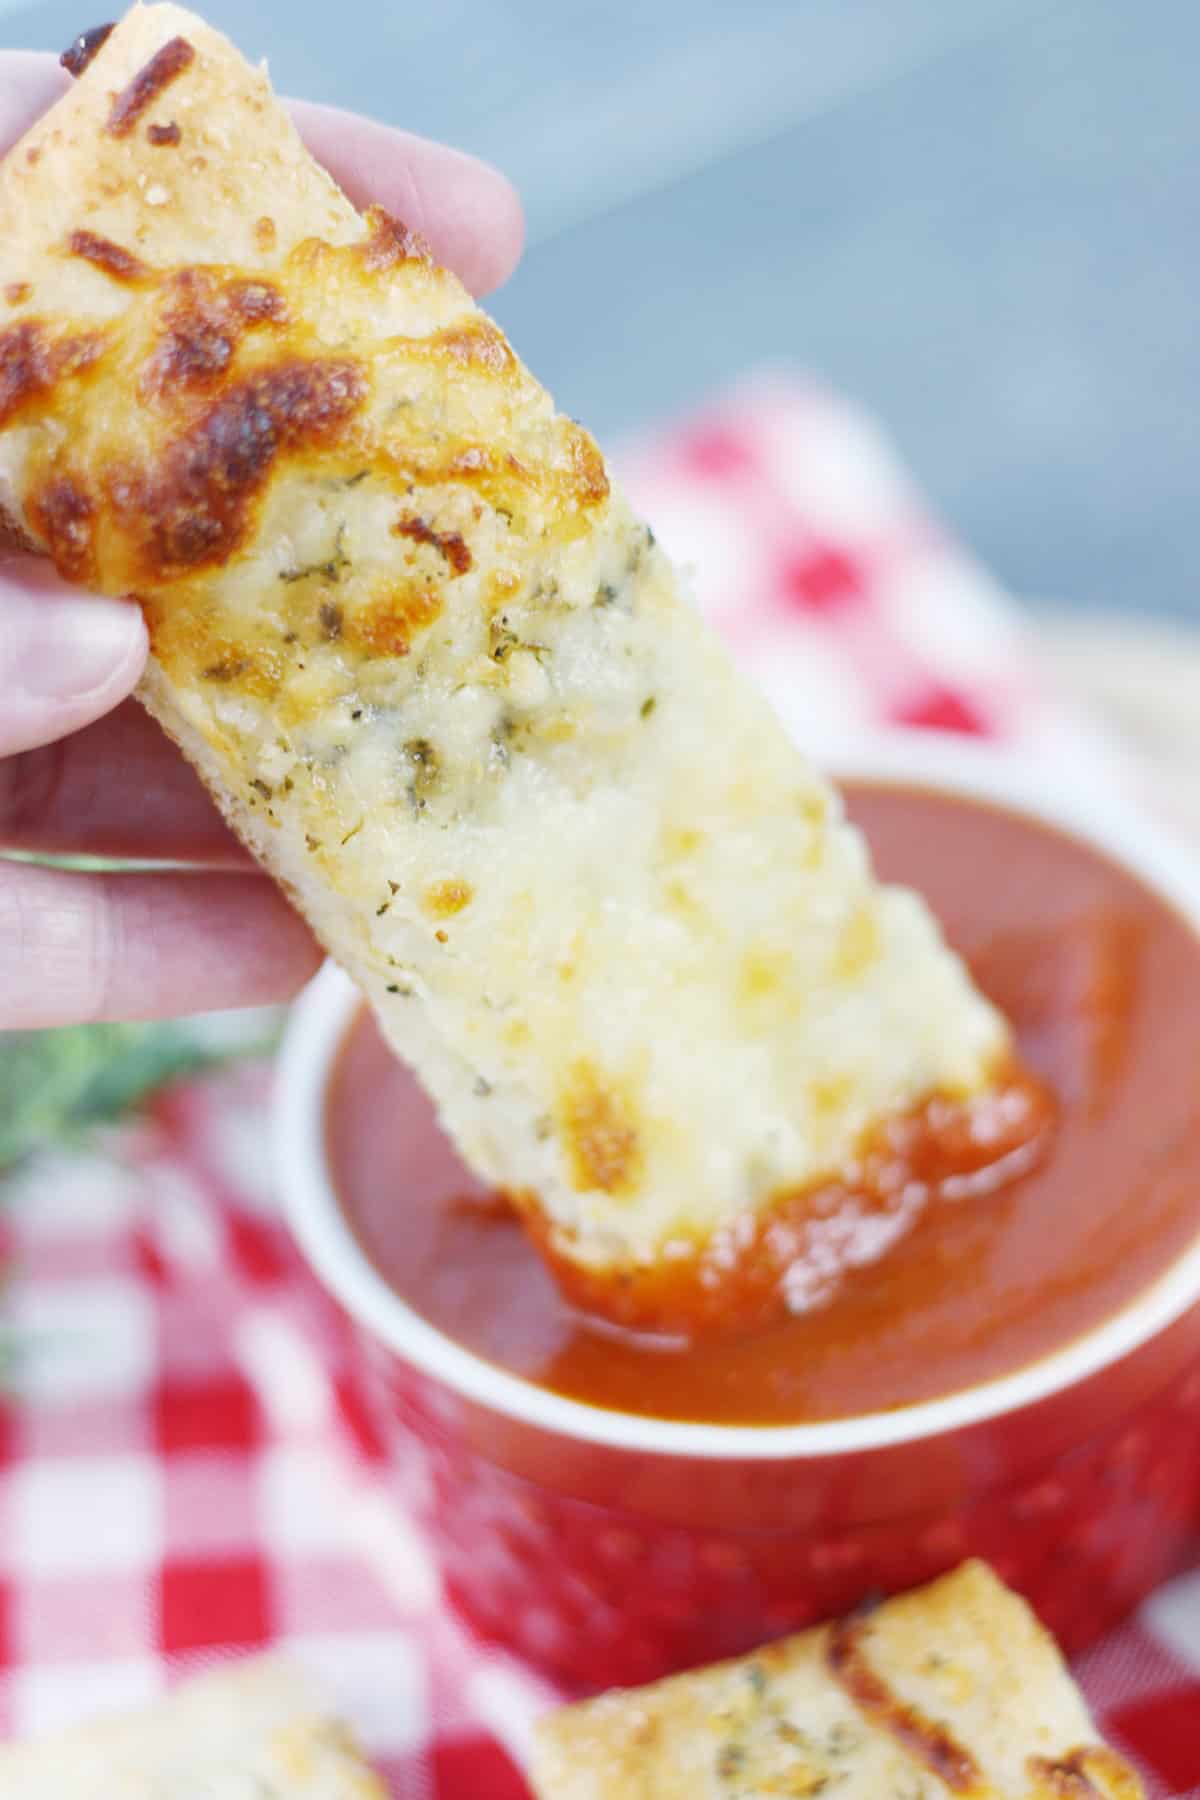 Dipping a pizza stick into some pizza sauce.